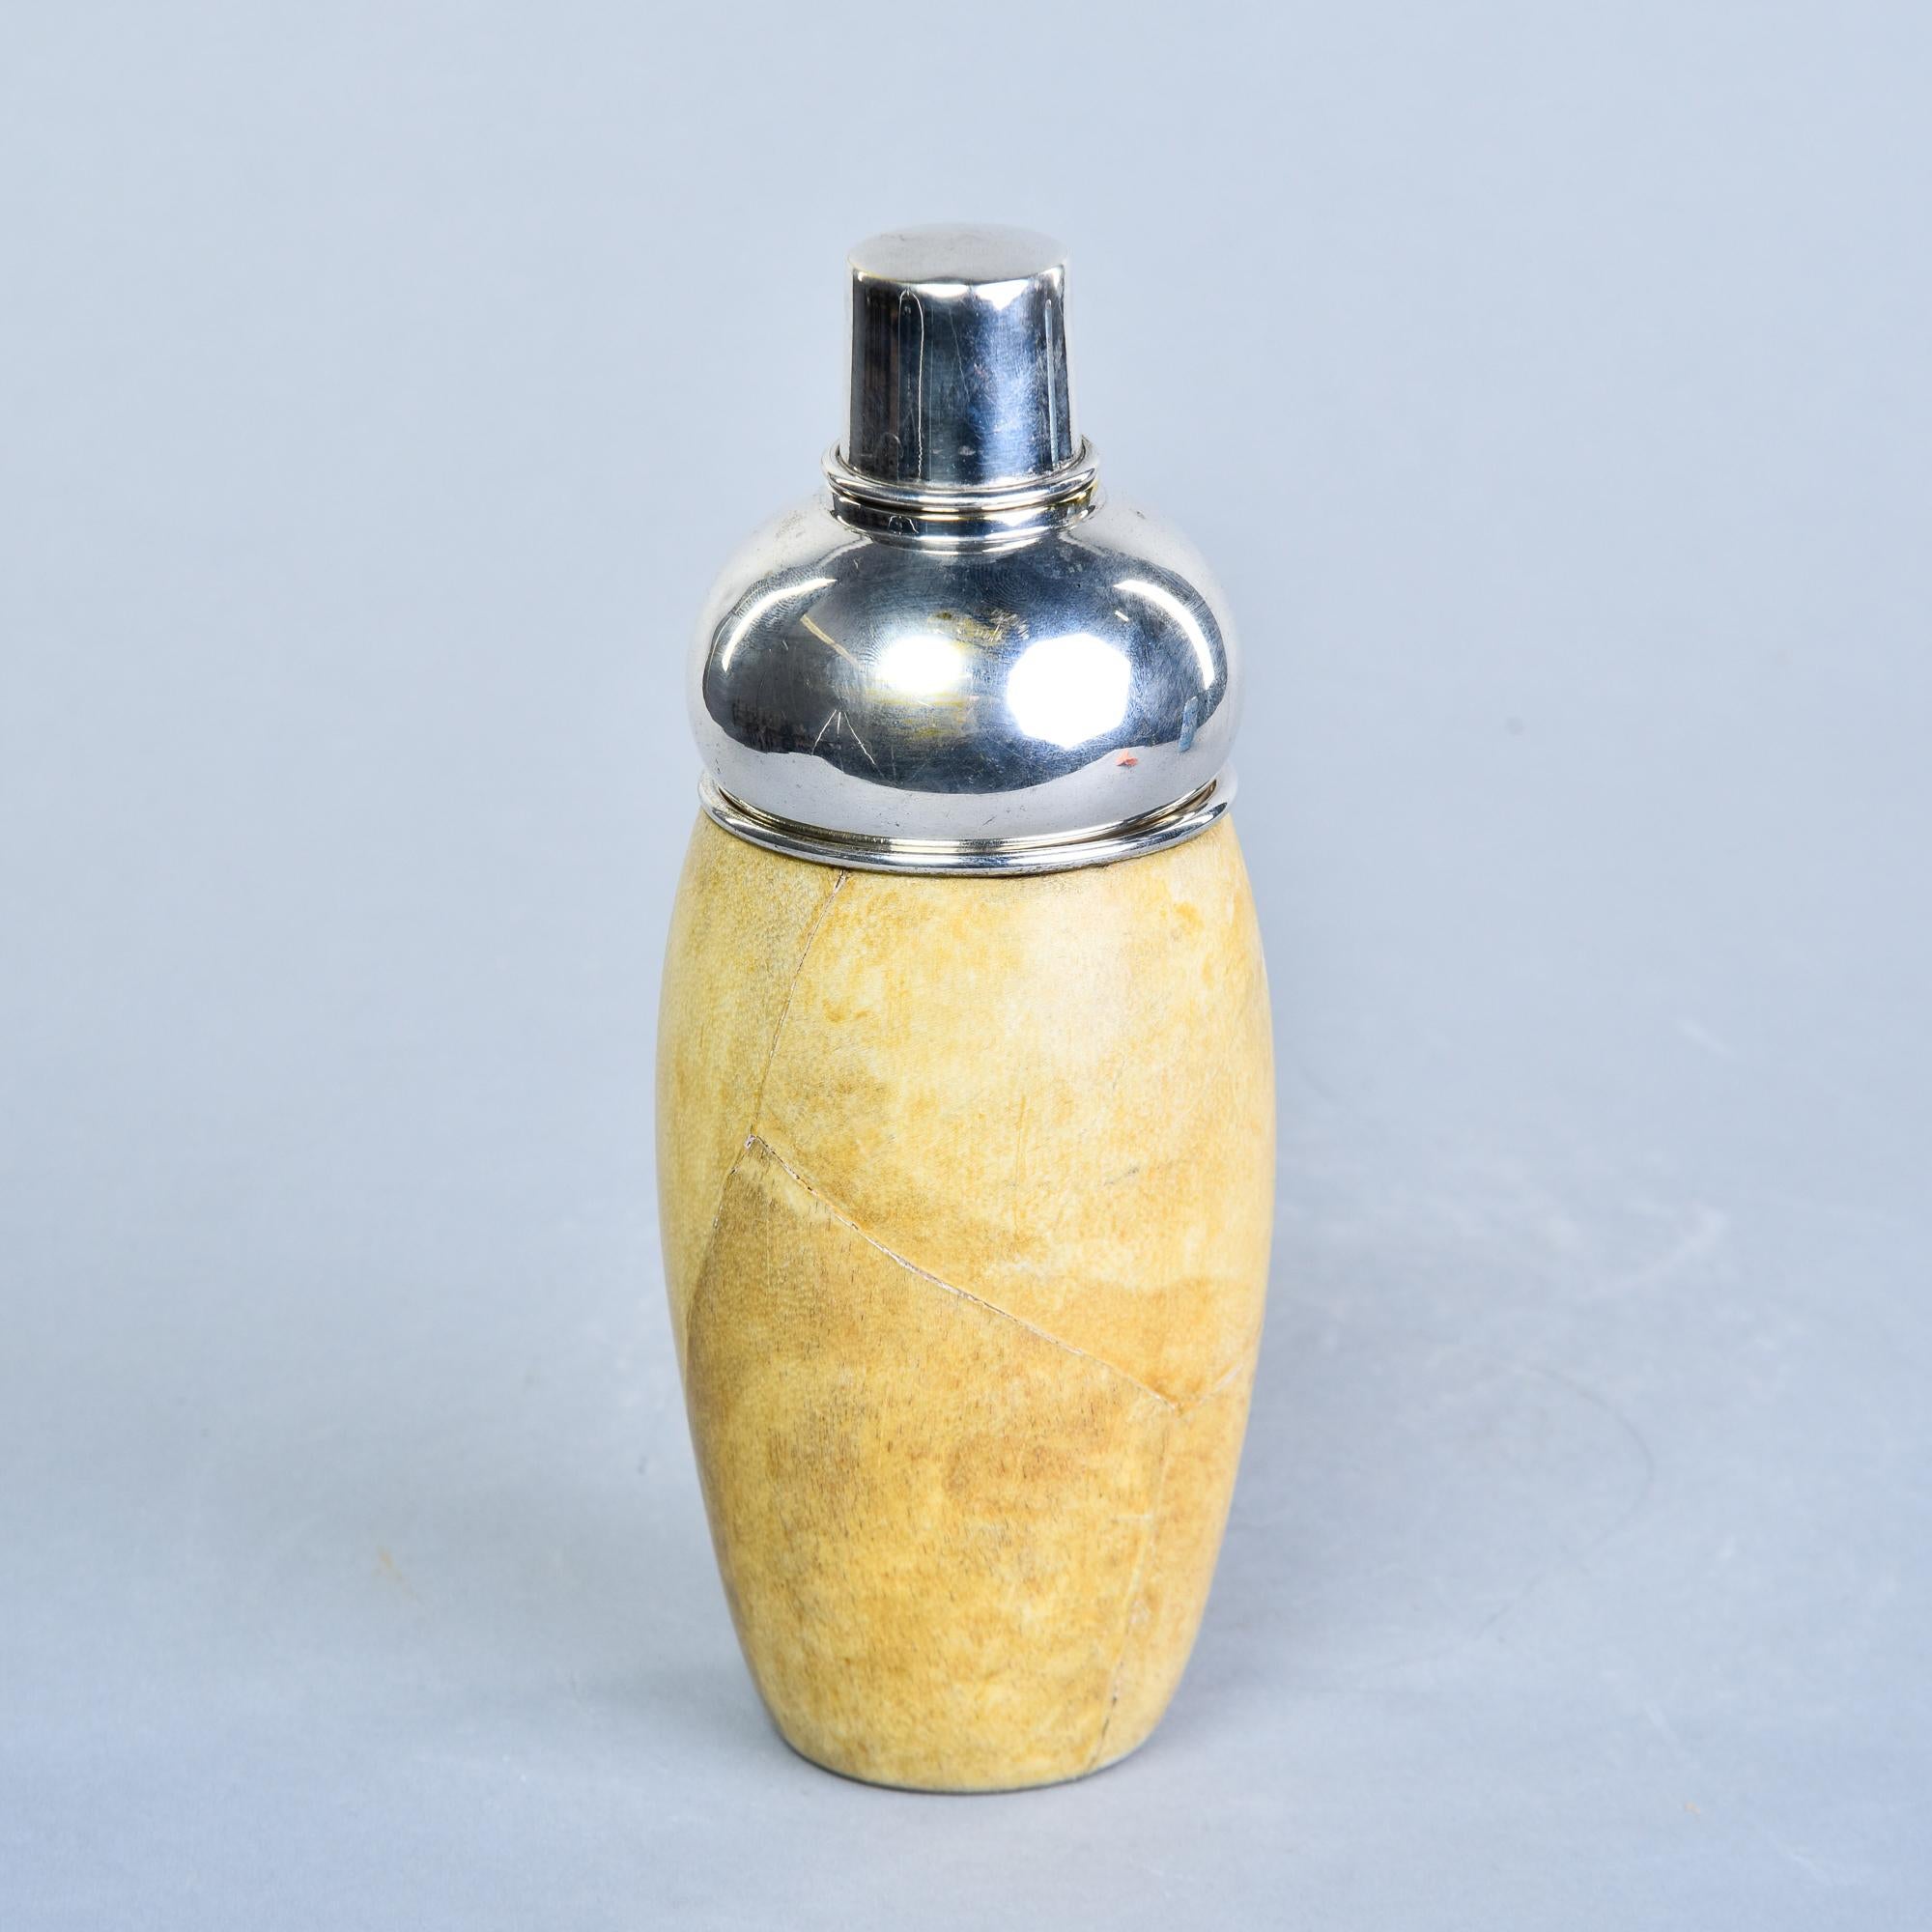 Found in Italy, this Aldo Tura cocktail shaker dates from the 1950s. The shaker body is a goatskin leather-clad wood shell with a stainless steel inner liner. Removable steel top and strainer. Leather has great age-related color. Very good overall